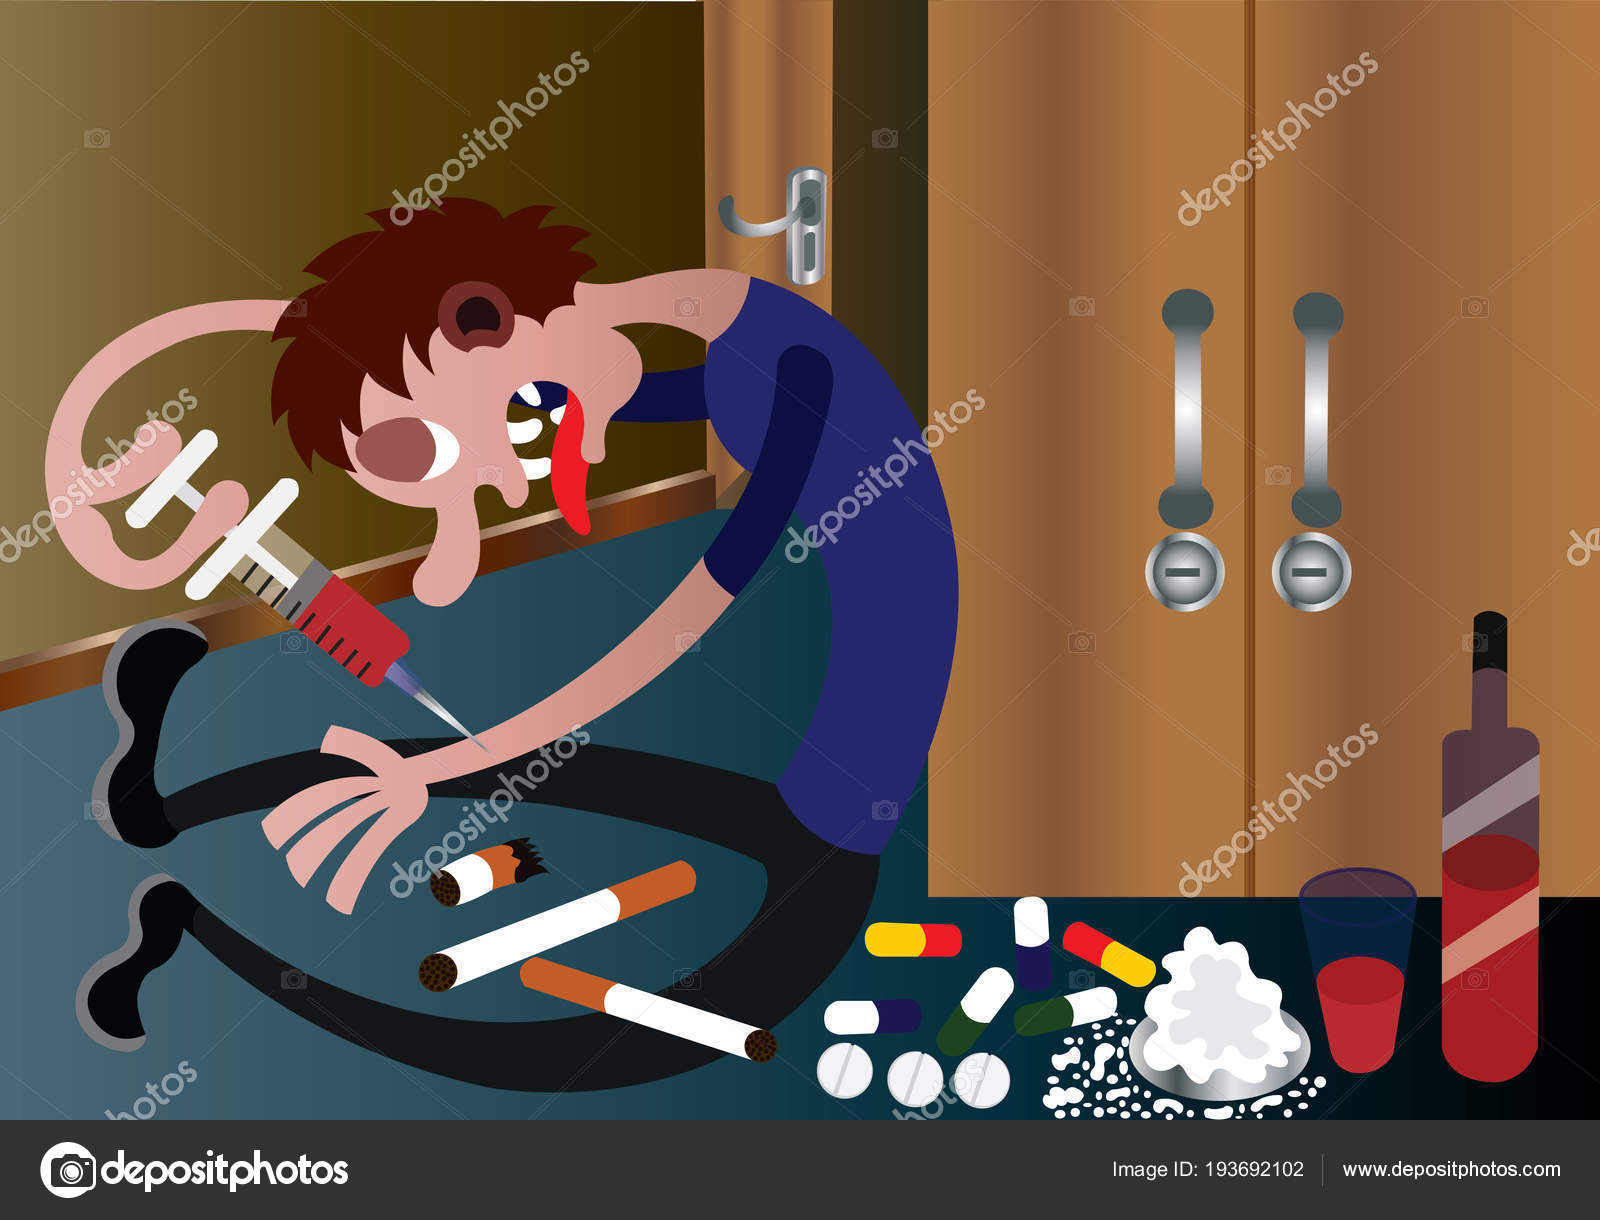 Illegal drugs Vector Art Stock Images | Depositphotos